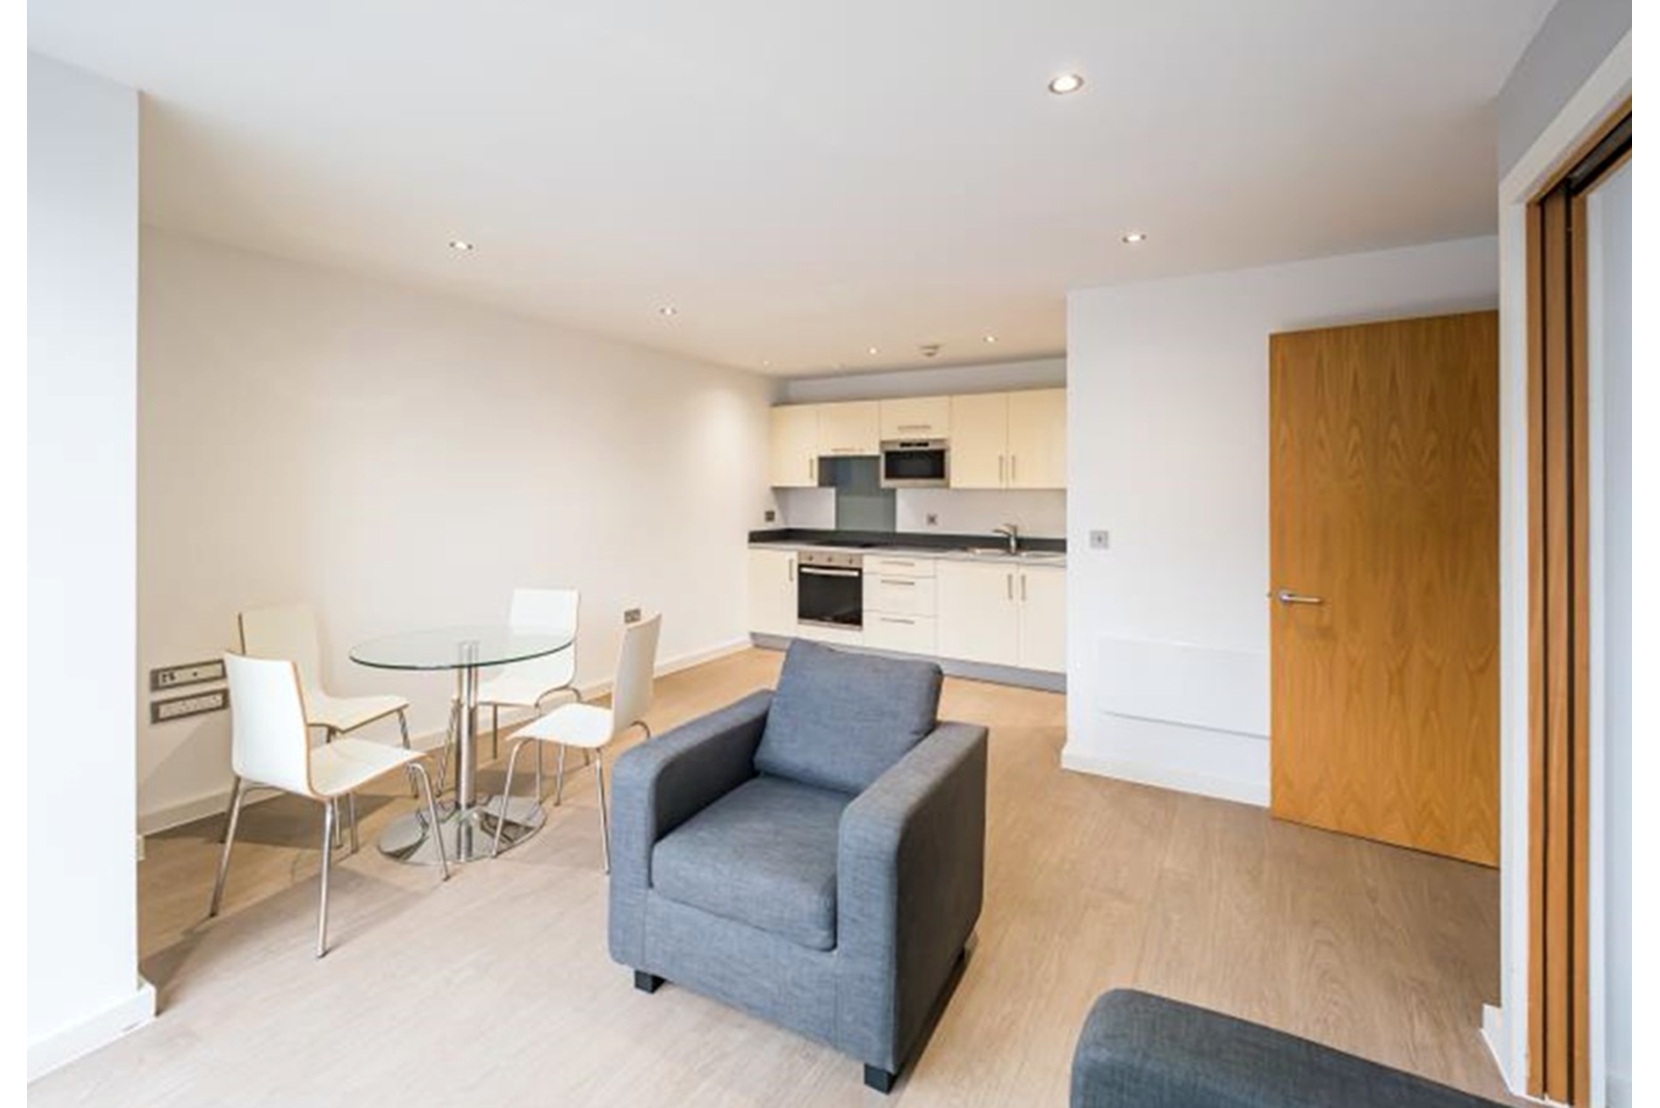 Apartments to Rent by Northern Group at Flint Glass Wharf, Manchester, M4, living kitchen dining area